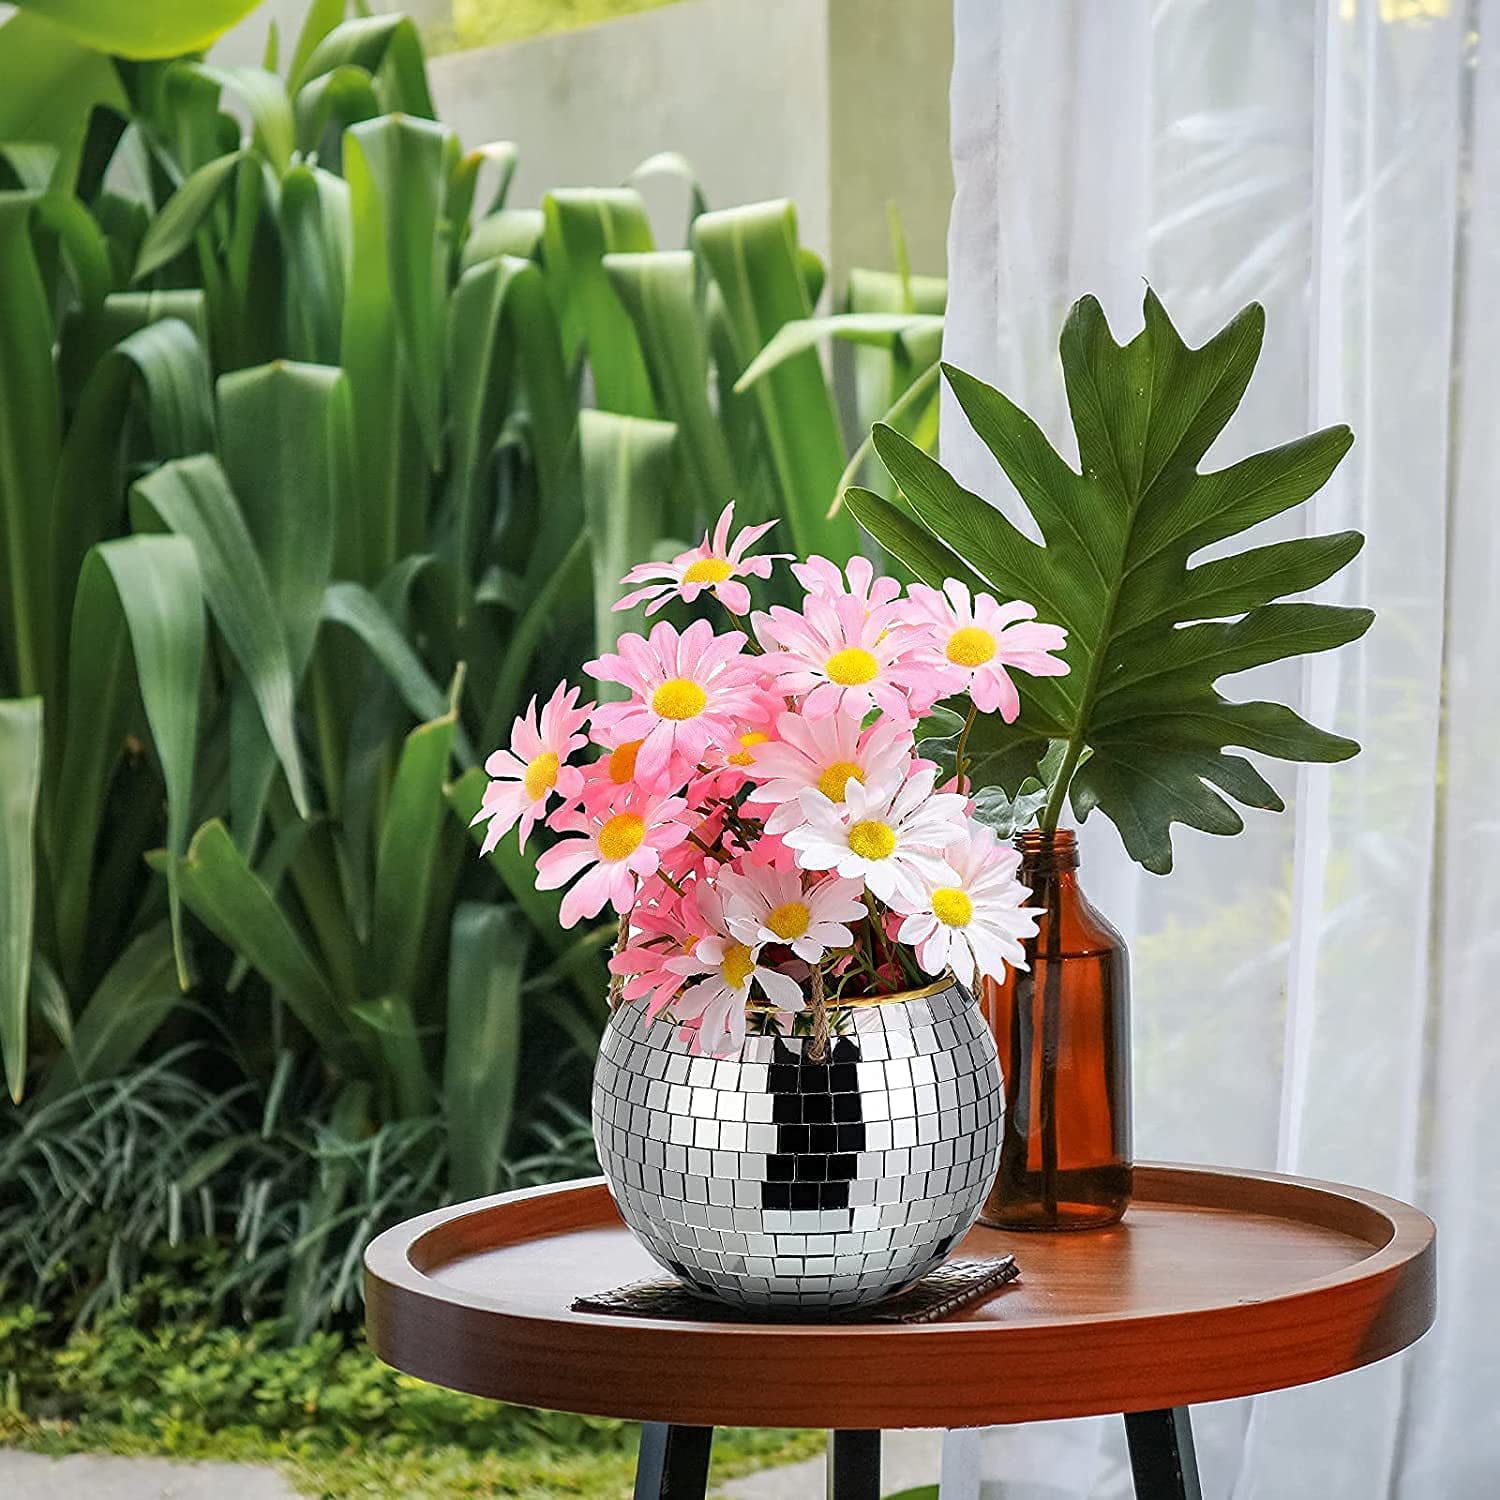 Disco Ball Planter, Hanging Macrame Rope Ball Planter Pot With Drainage  Hole For Plant Care, Indoor Or Outdoor Use For Room Office Patio Pot Decor  – Walmart Throughout Ball Plant Stands (View 5 of 15)